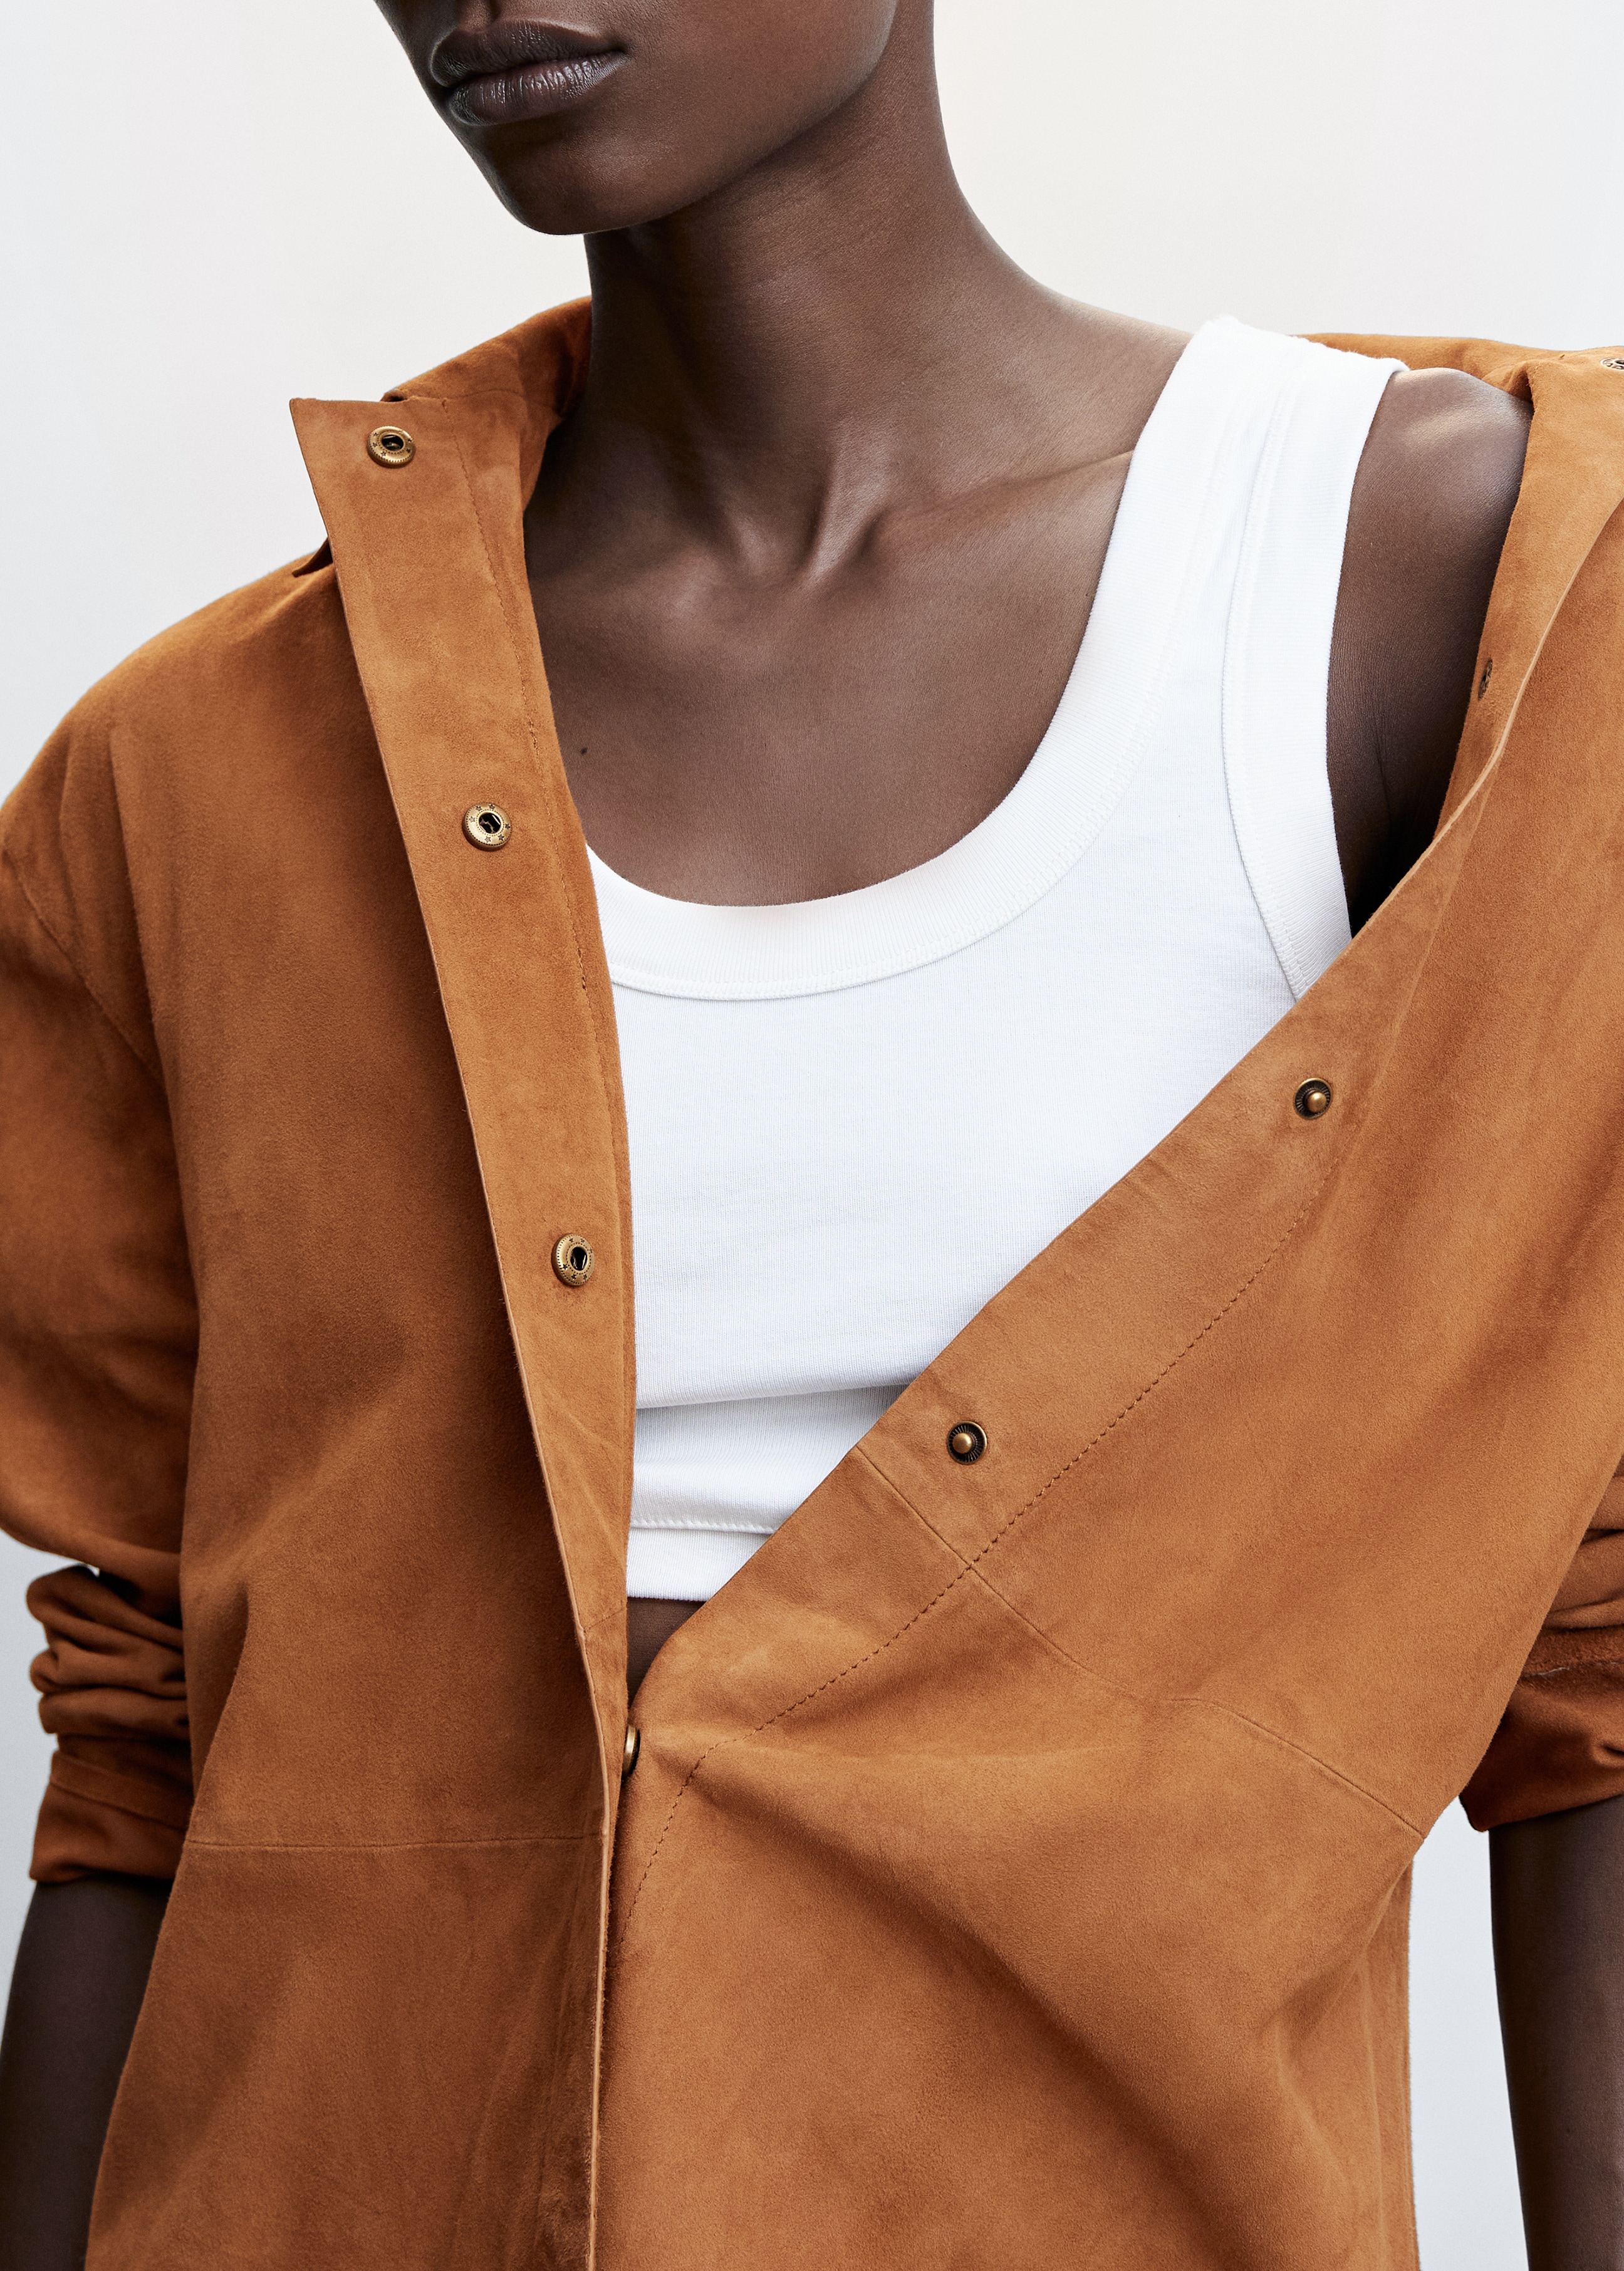 Suede leather shirt - Details of the article 1